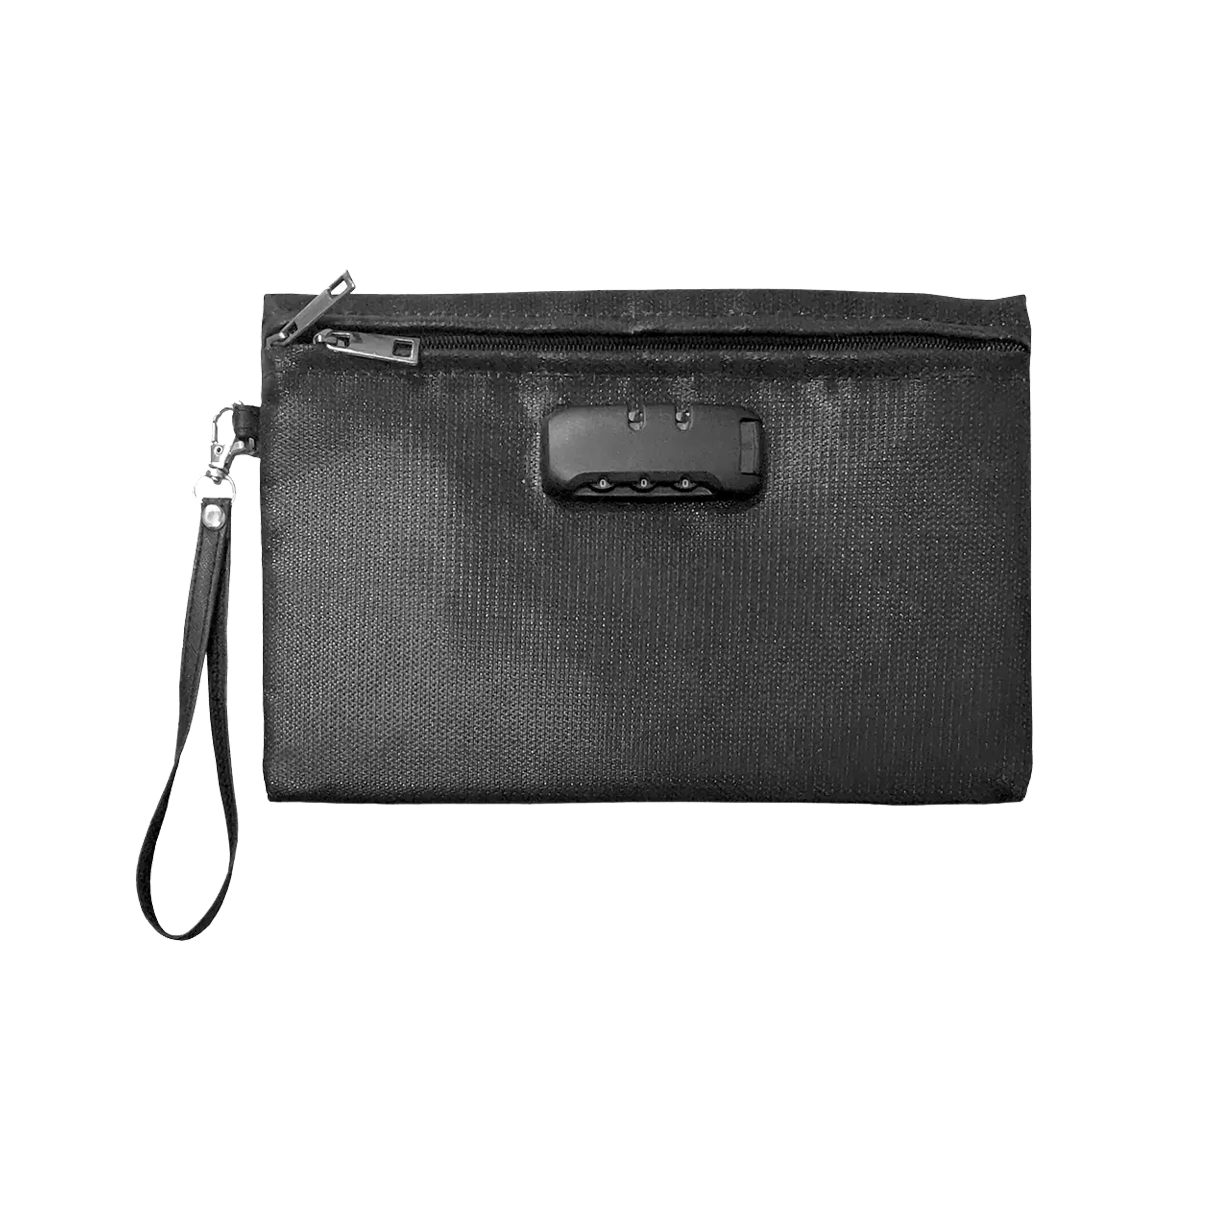 Water & Fire Resistant Document Bag with Lock